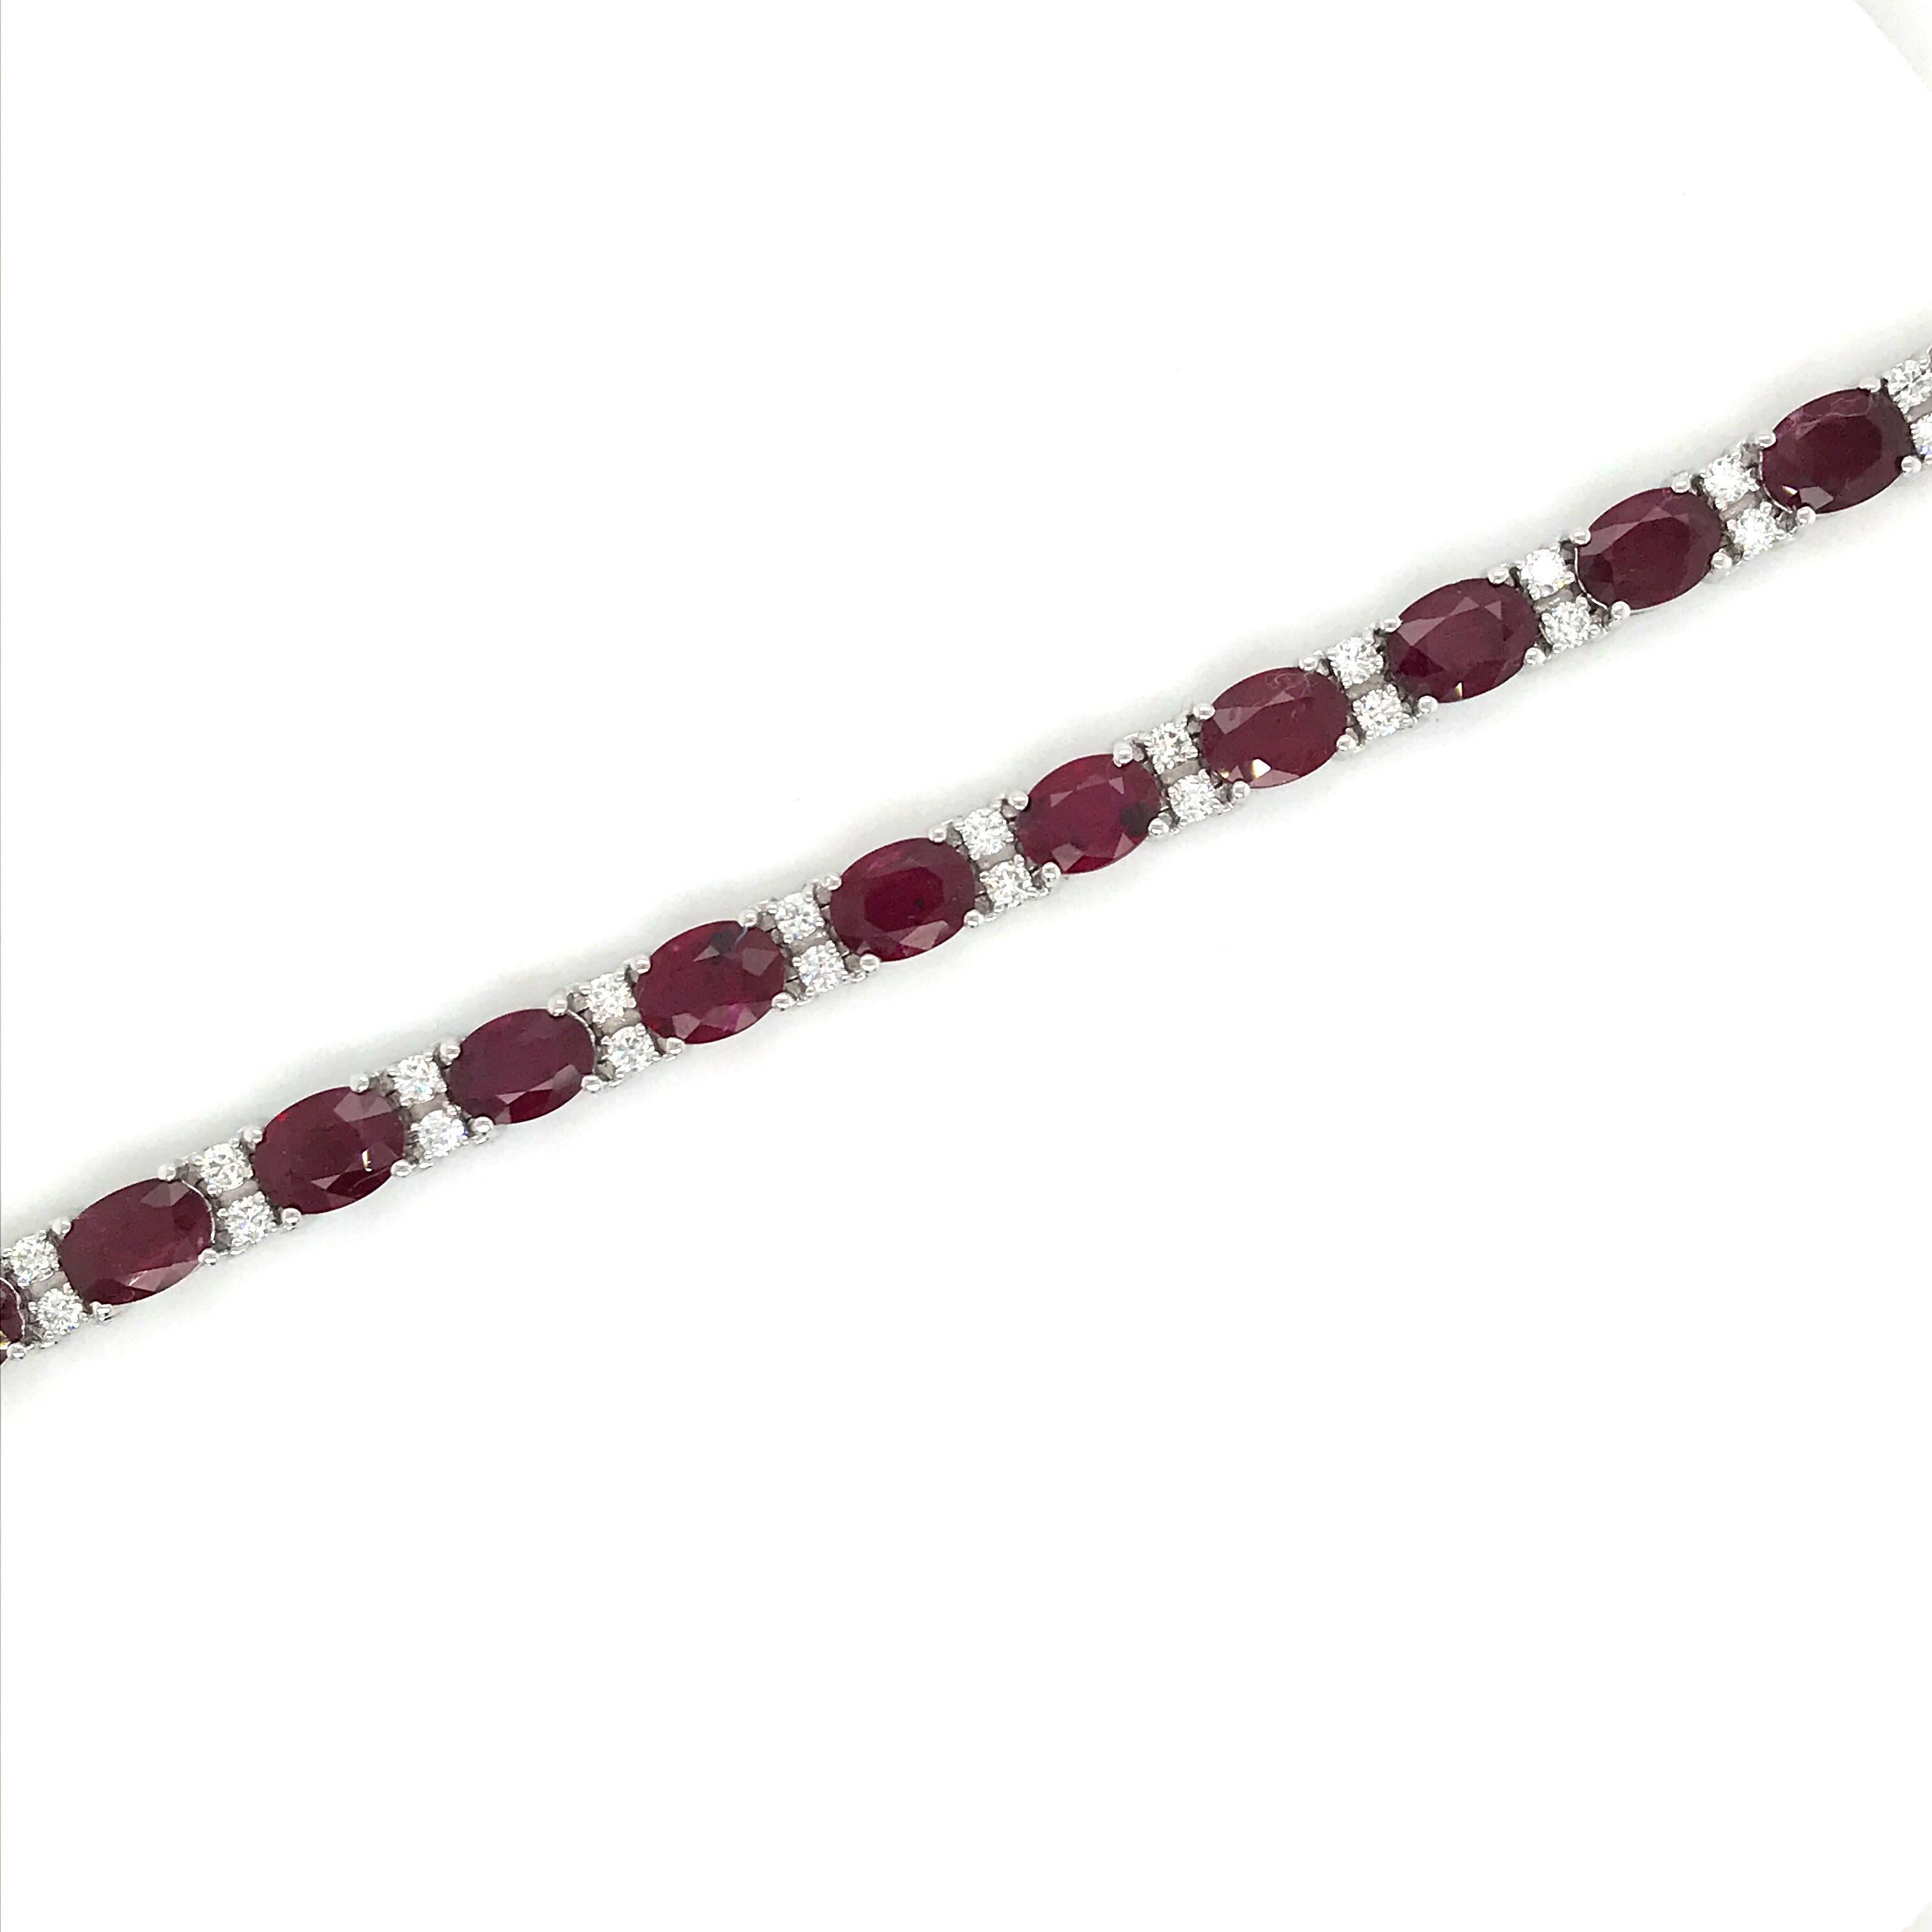 14K White gold tennis bracelet featuring 16 red oval rubies weighing 22 carats and alternating round brilliants weighing 1.82 carats.
Color G-H
Clarity SI